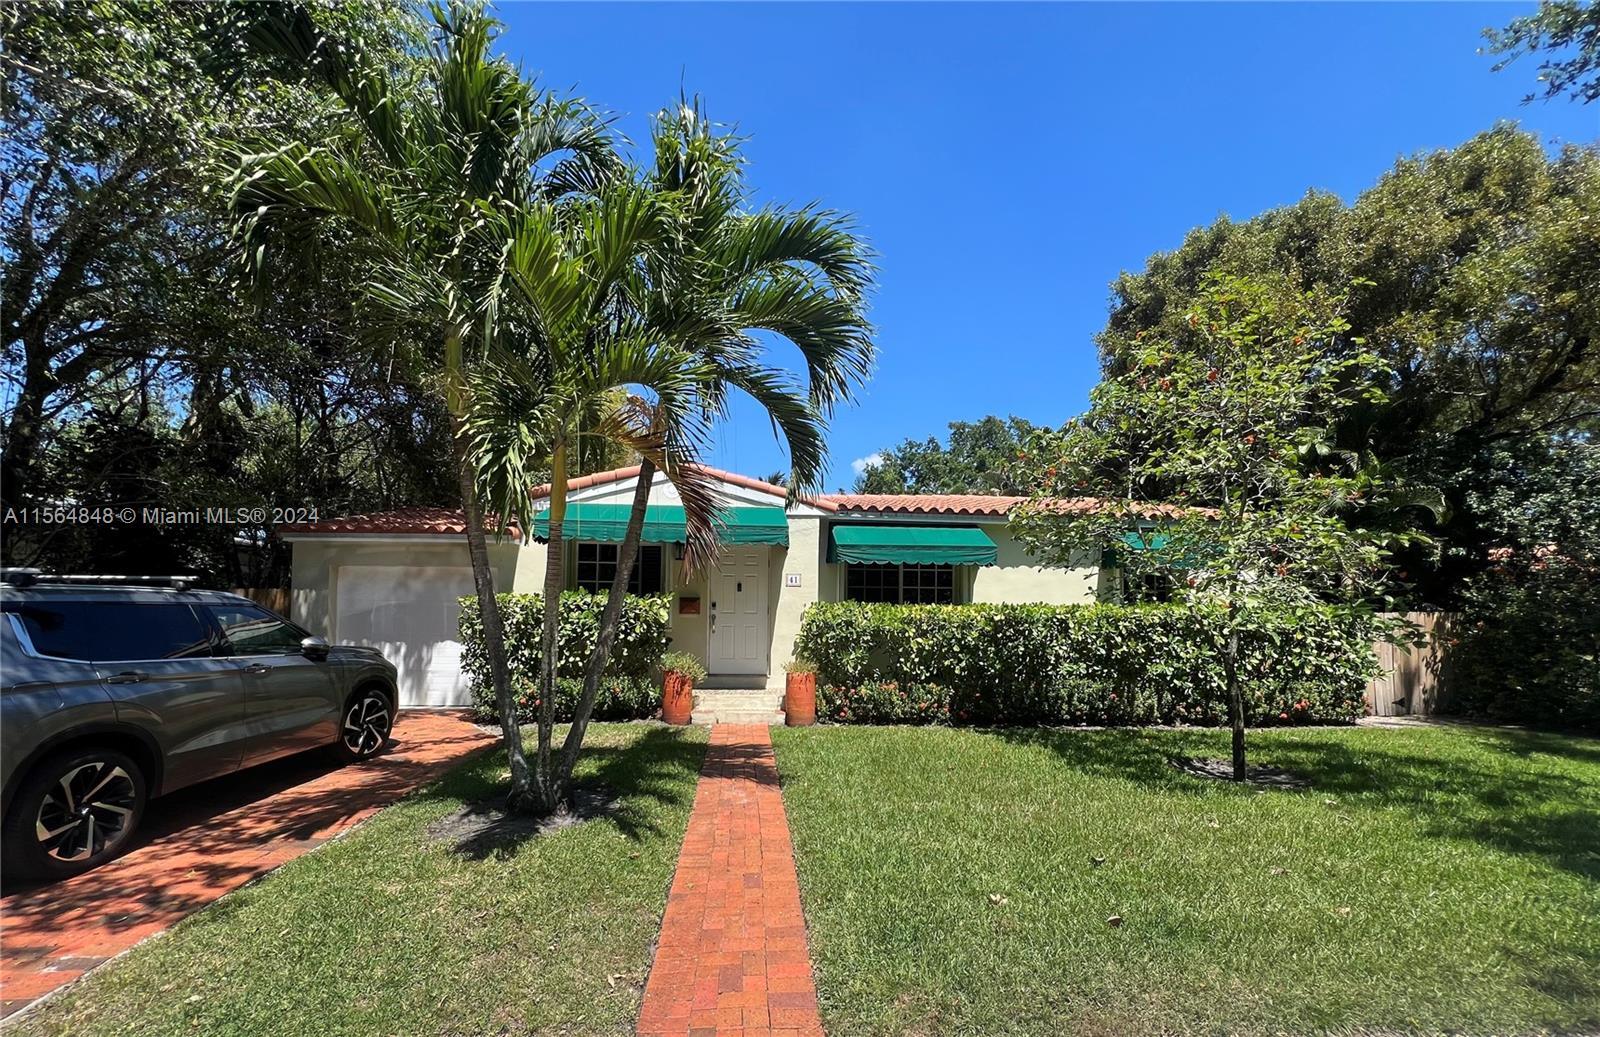 Photo of 41 NW 107th St in Miami Shores, FL